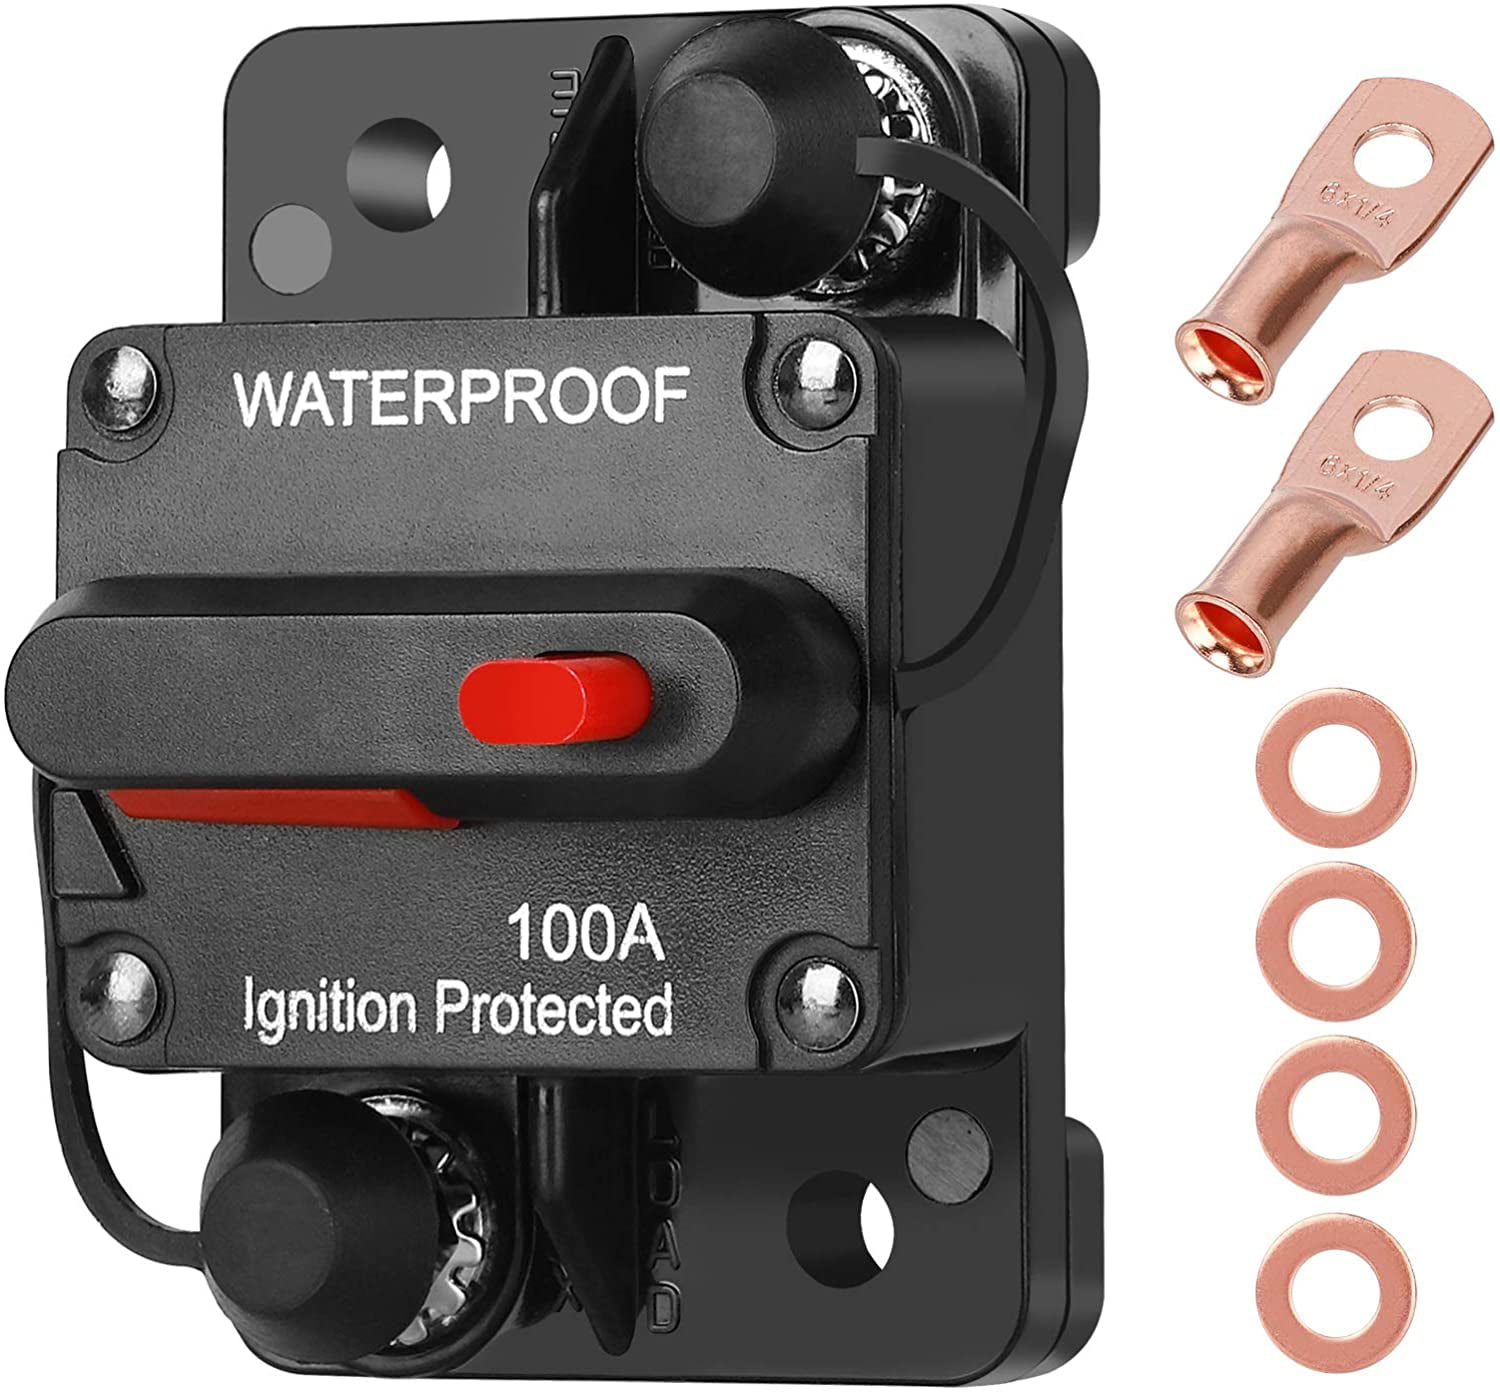 200 Amp Waterproof Circuit Breaker,with Manual Reset,12V-48V DC,30A-300A,for Car Marine Trolling Motors Boat ATV Manual Power Protect Audio System Current Overload Protection 